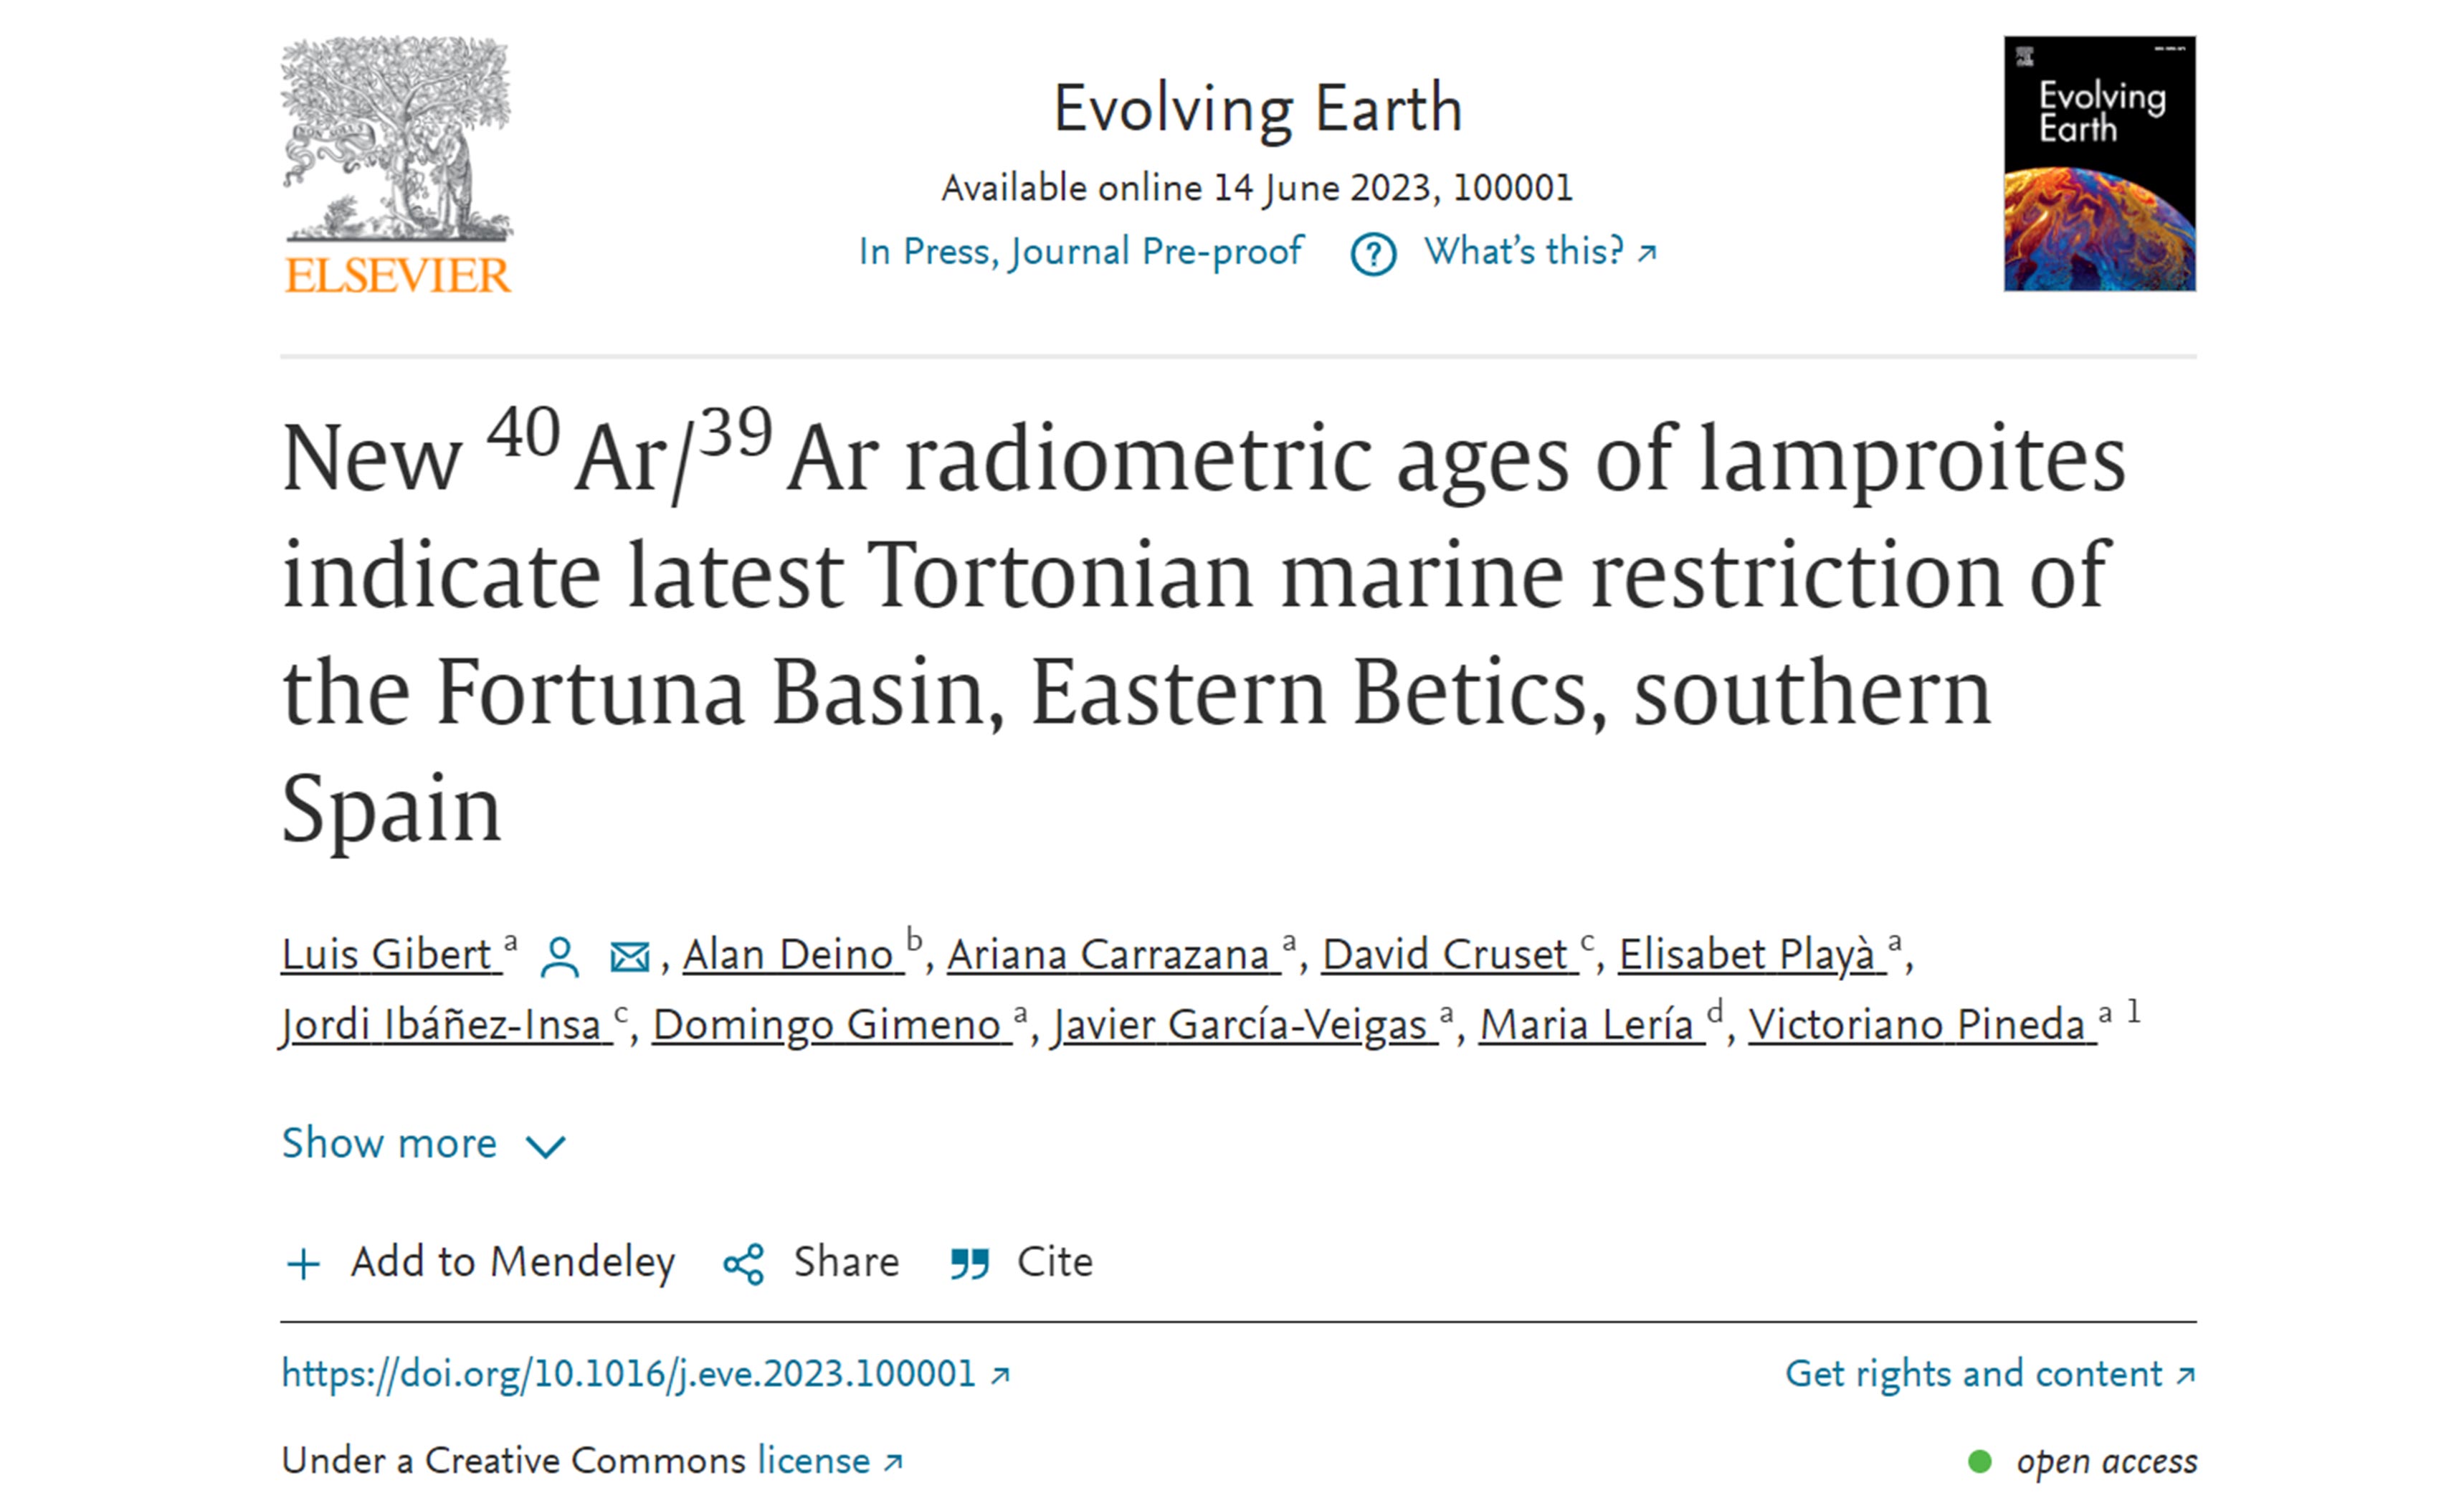 New 40Ar/39Ar radiometric ages of lamproites indicate latest Tortonian marine restriction of the Fortuna Basin, Eastern Betics, southern Spain